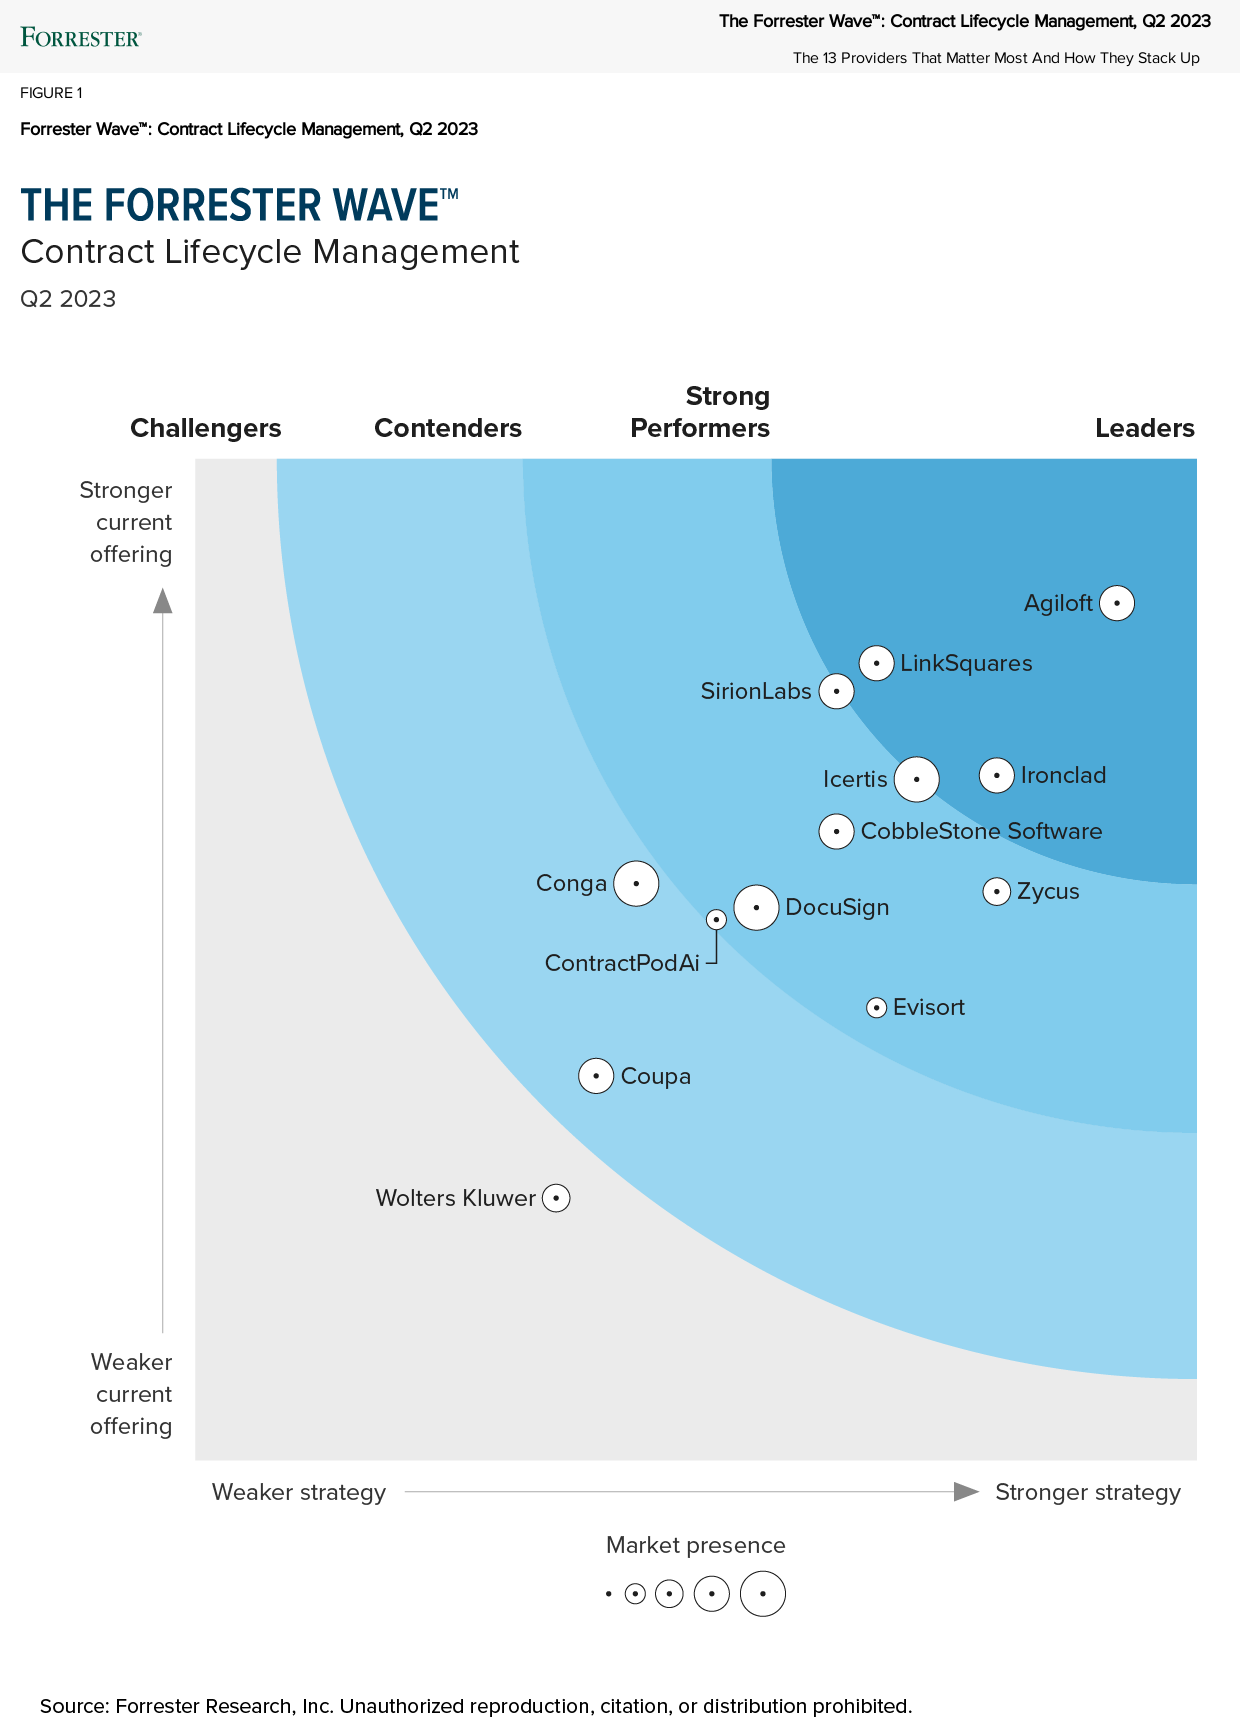 The Forrester Wave for CLM